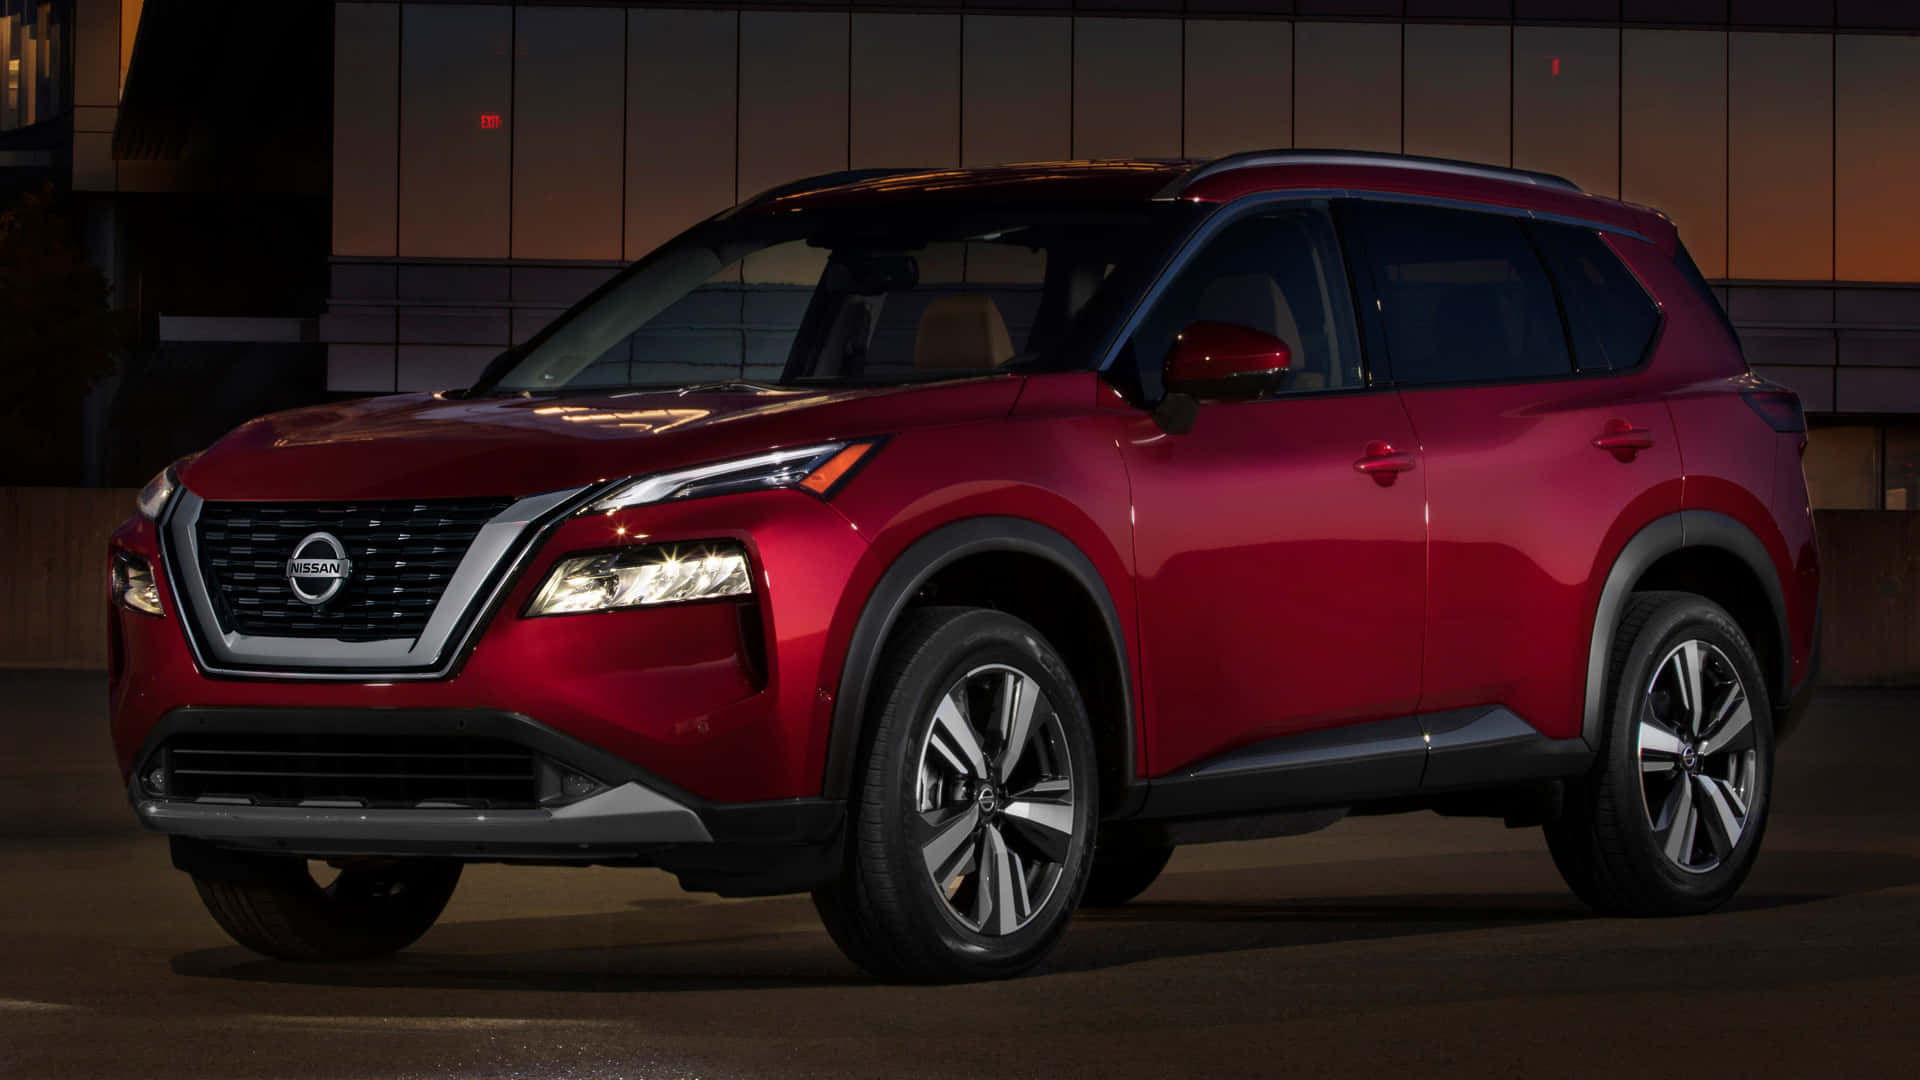 Nissan Rogue In Majestic Red Finish Wallpaper